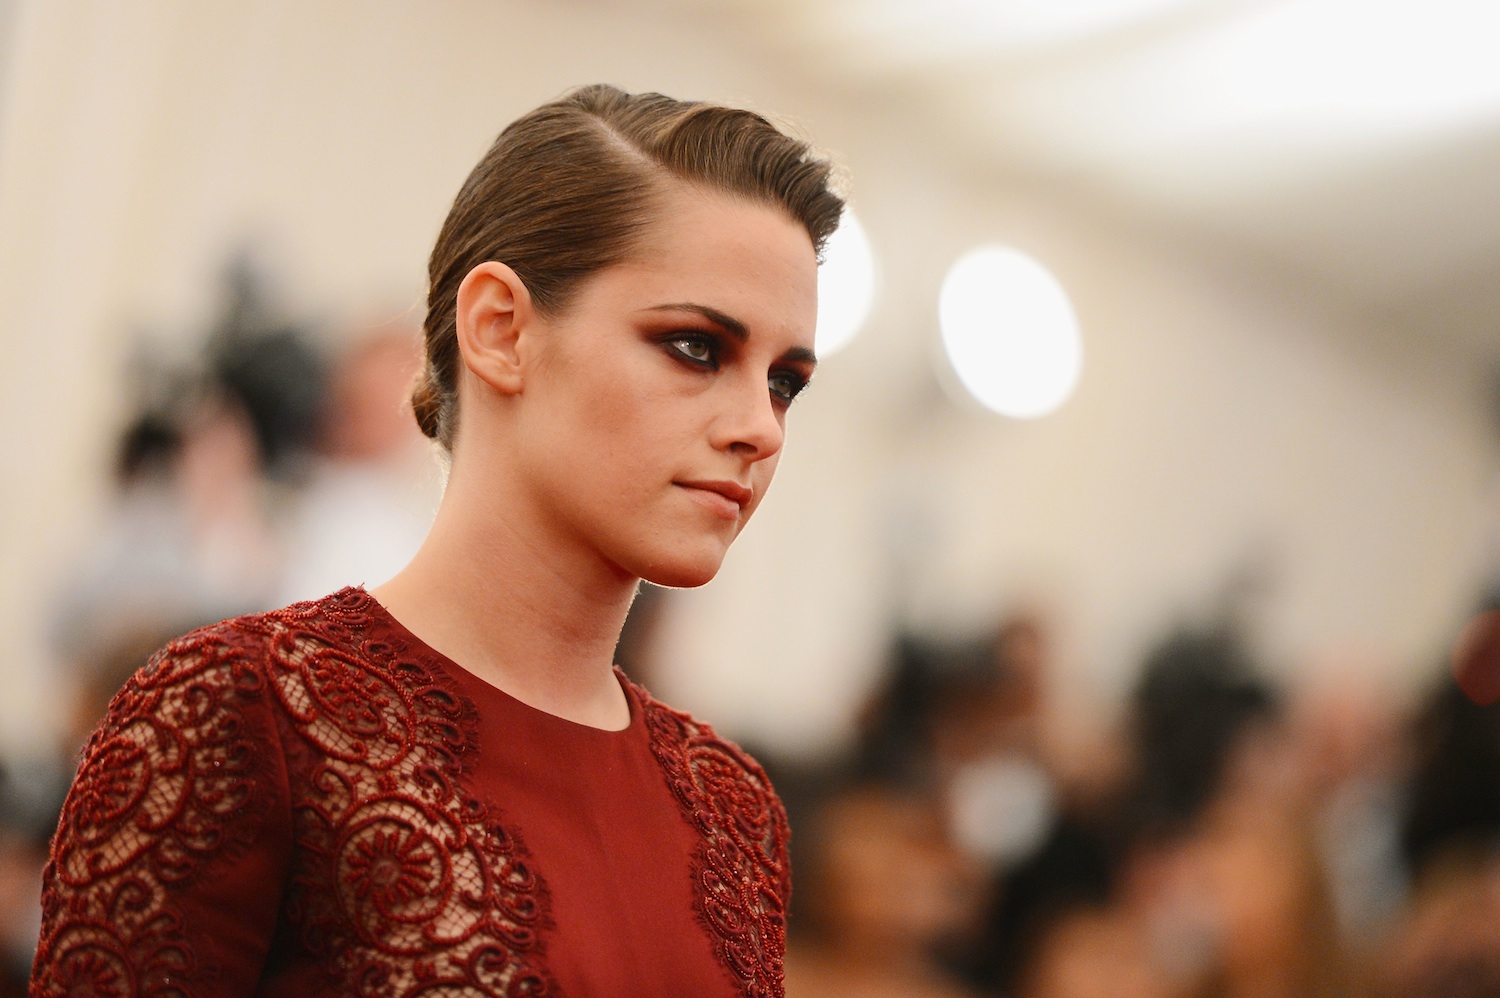 Kristen Stewart attends the Costume Institute Gala for the "PUNK: Chaos to Couture" exhibition at the Metropolitan Museum of Art on May 6, 2013 in New York City. (Stephen Lovekin / FilmMagic / Getty Images)